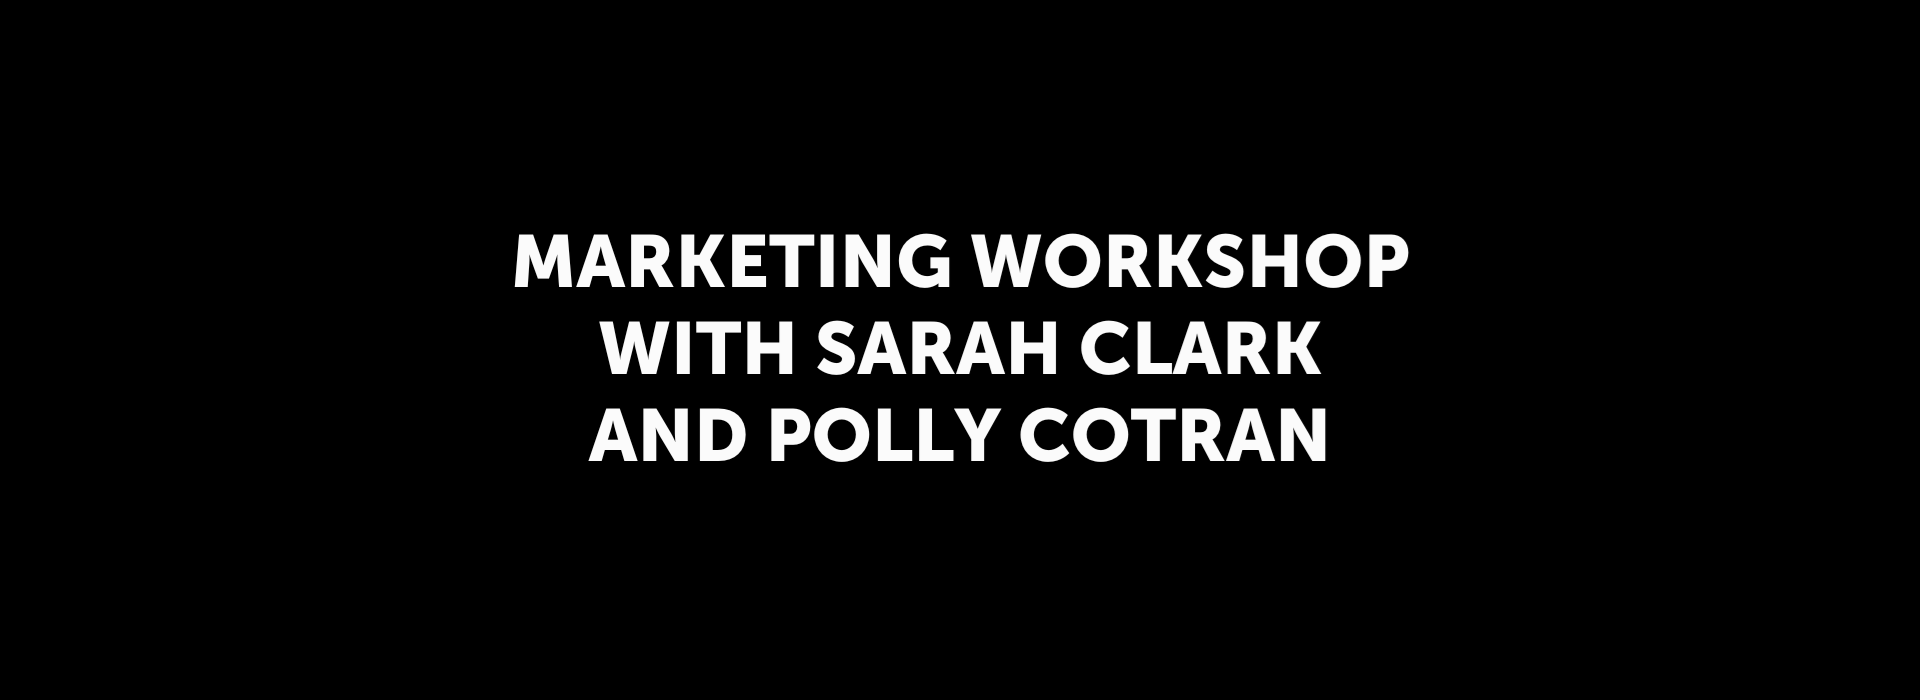 Marketing Workshop with Sarah Clark and Polly Cotran